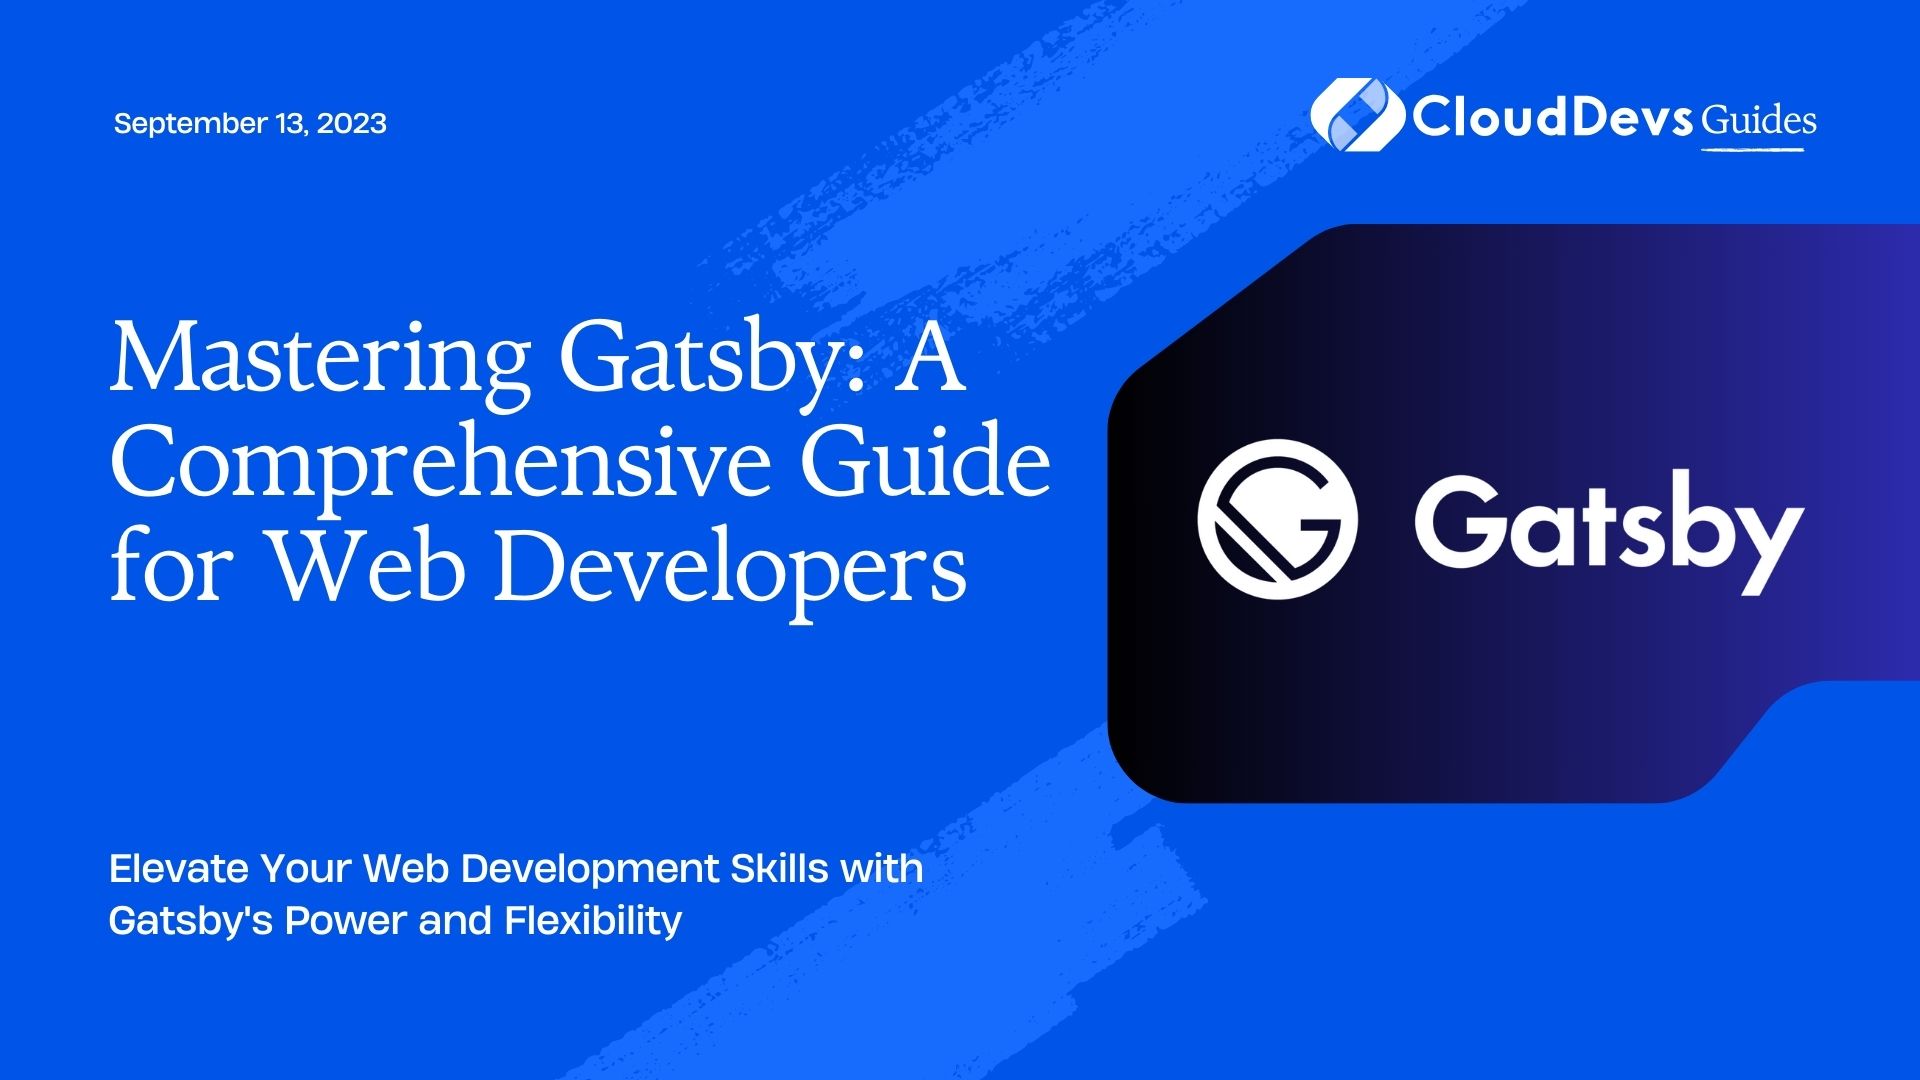 Mastering Gatsby: A Comprehensive Guide for Web Developers